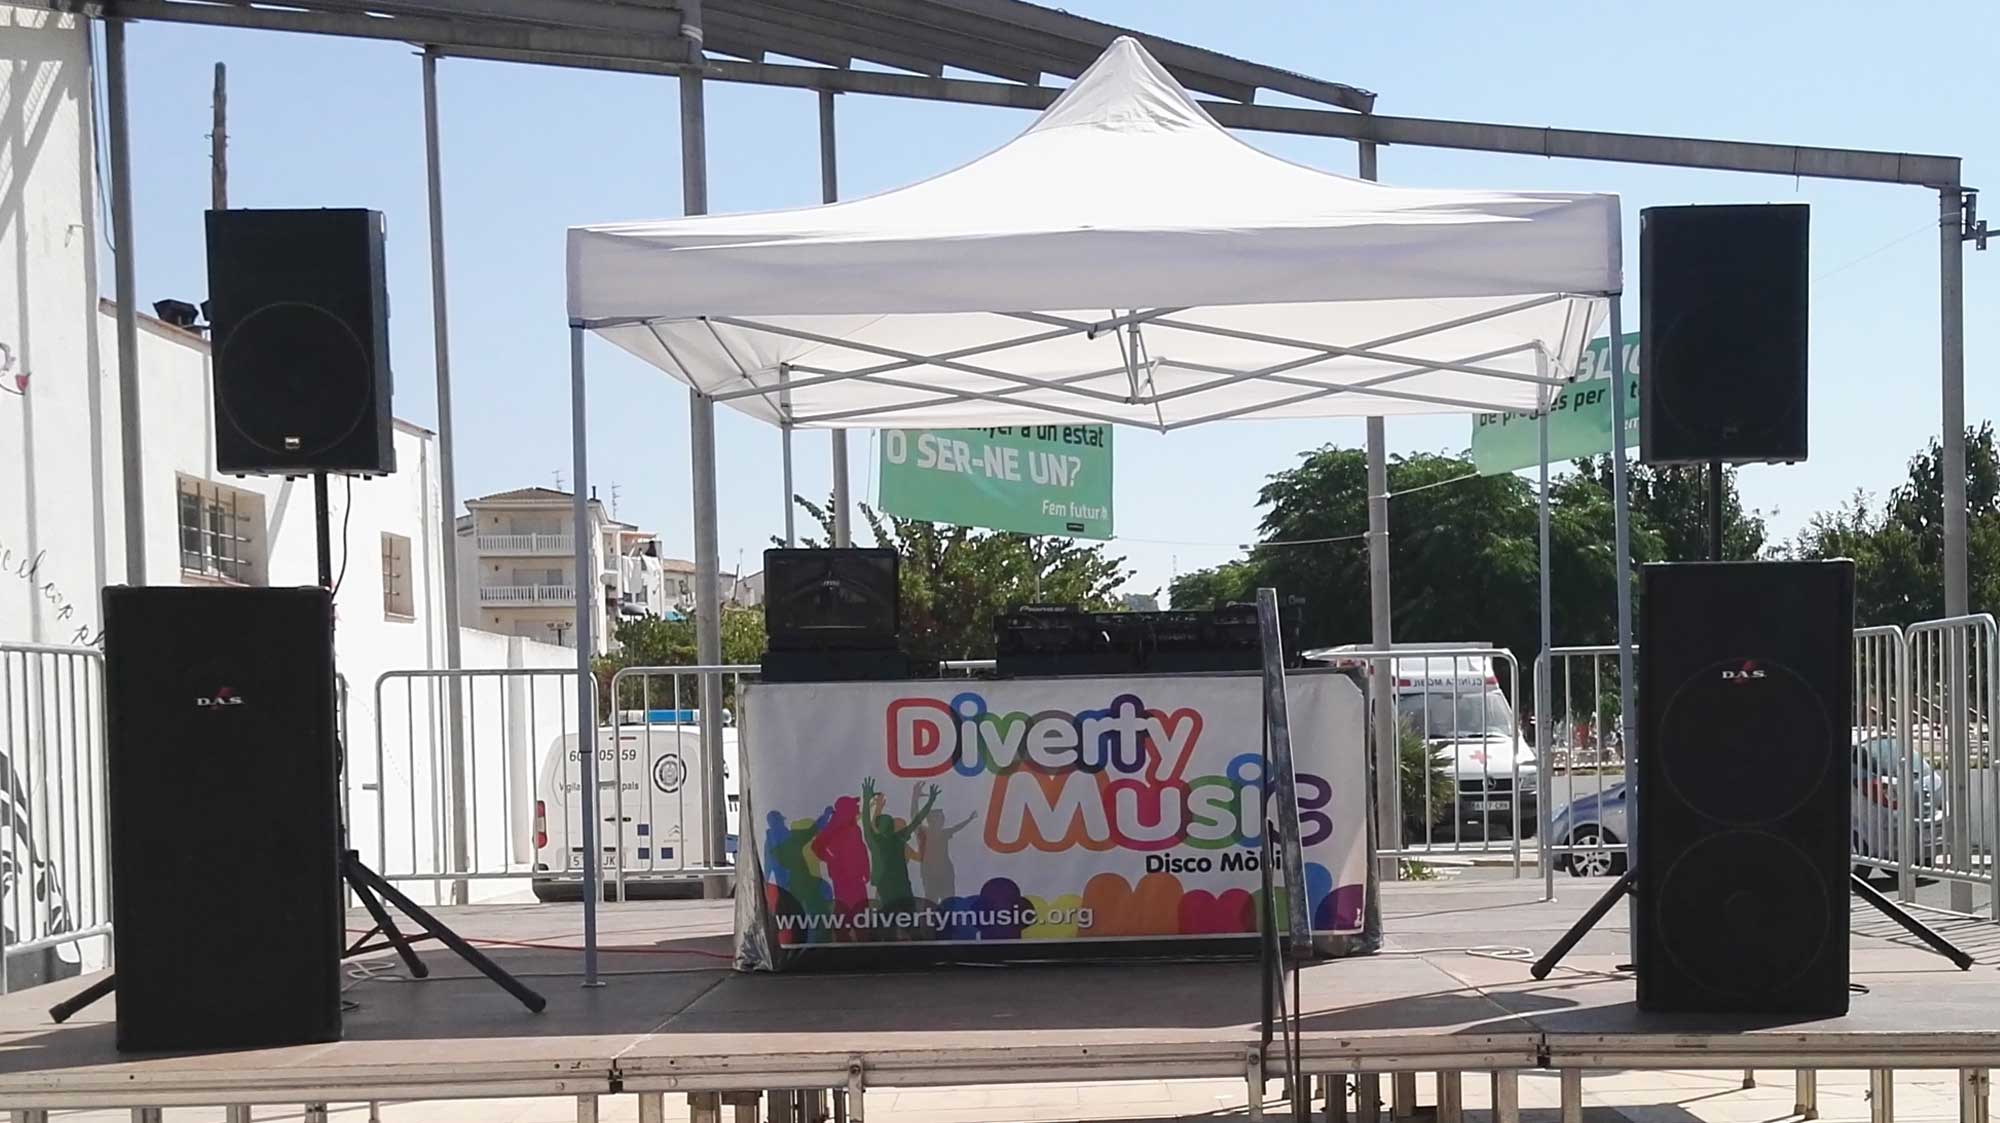 Diverty Music